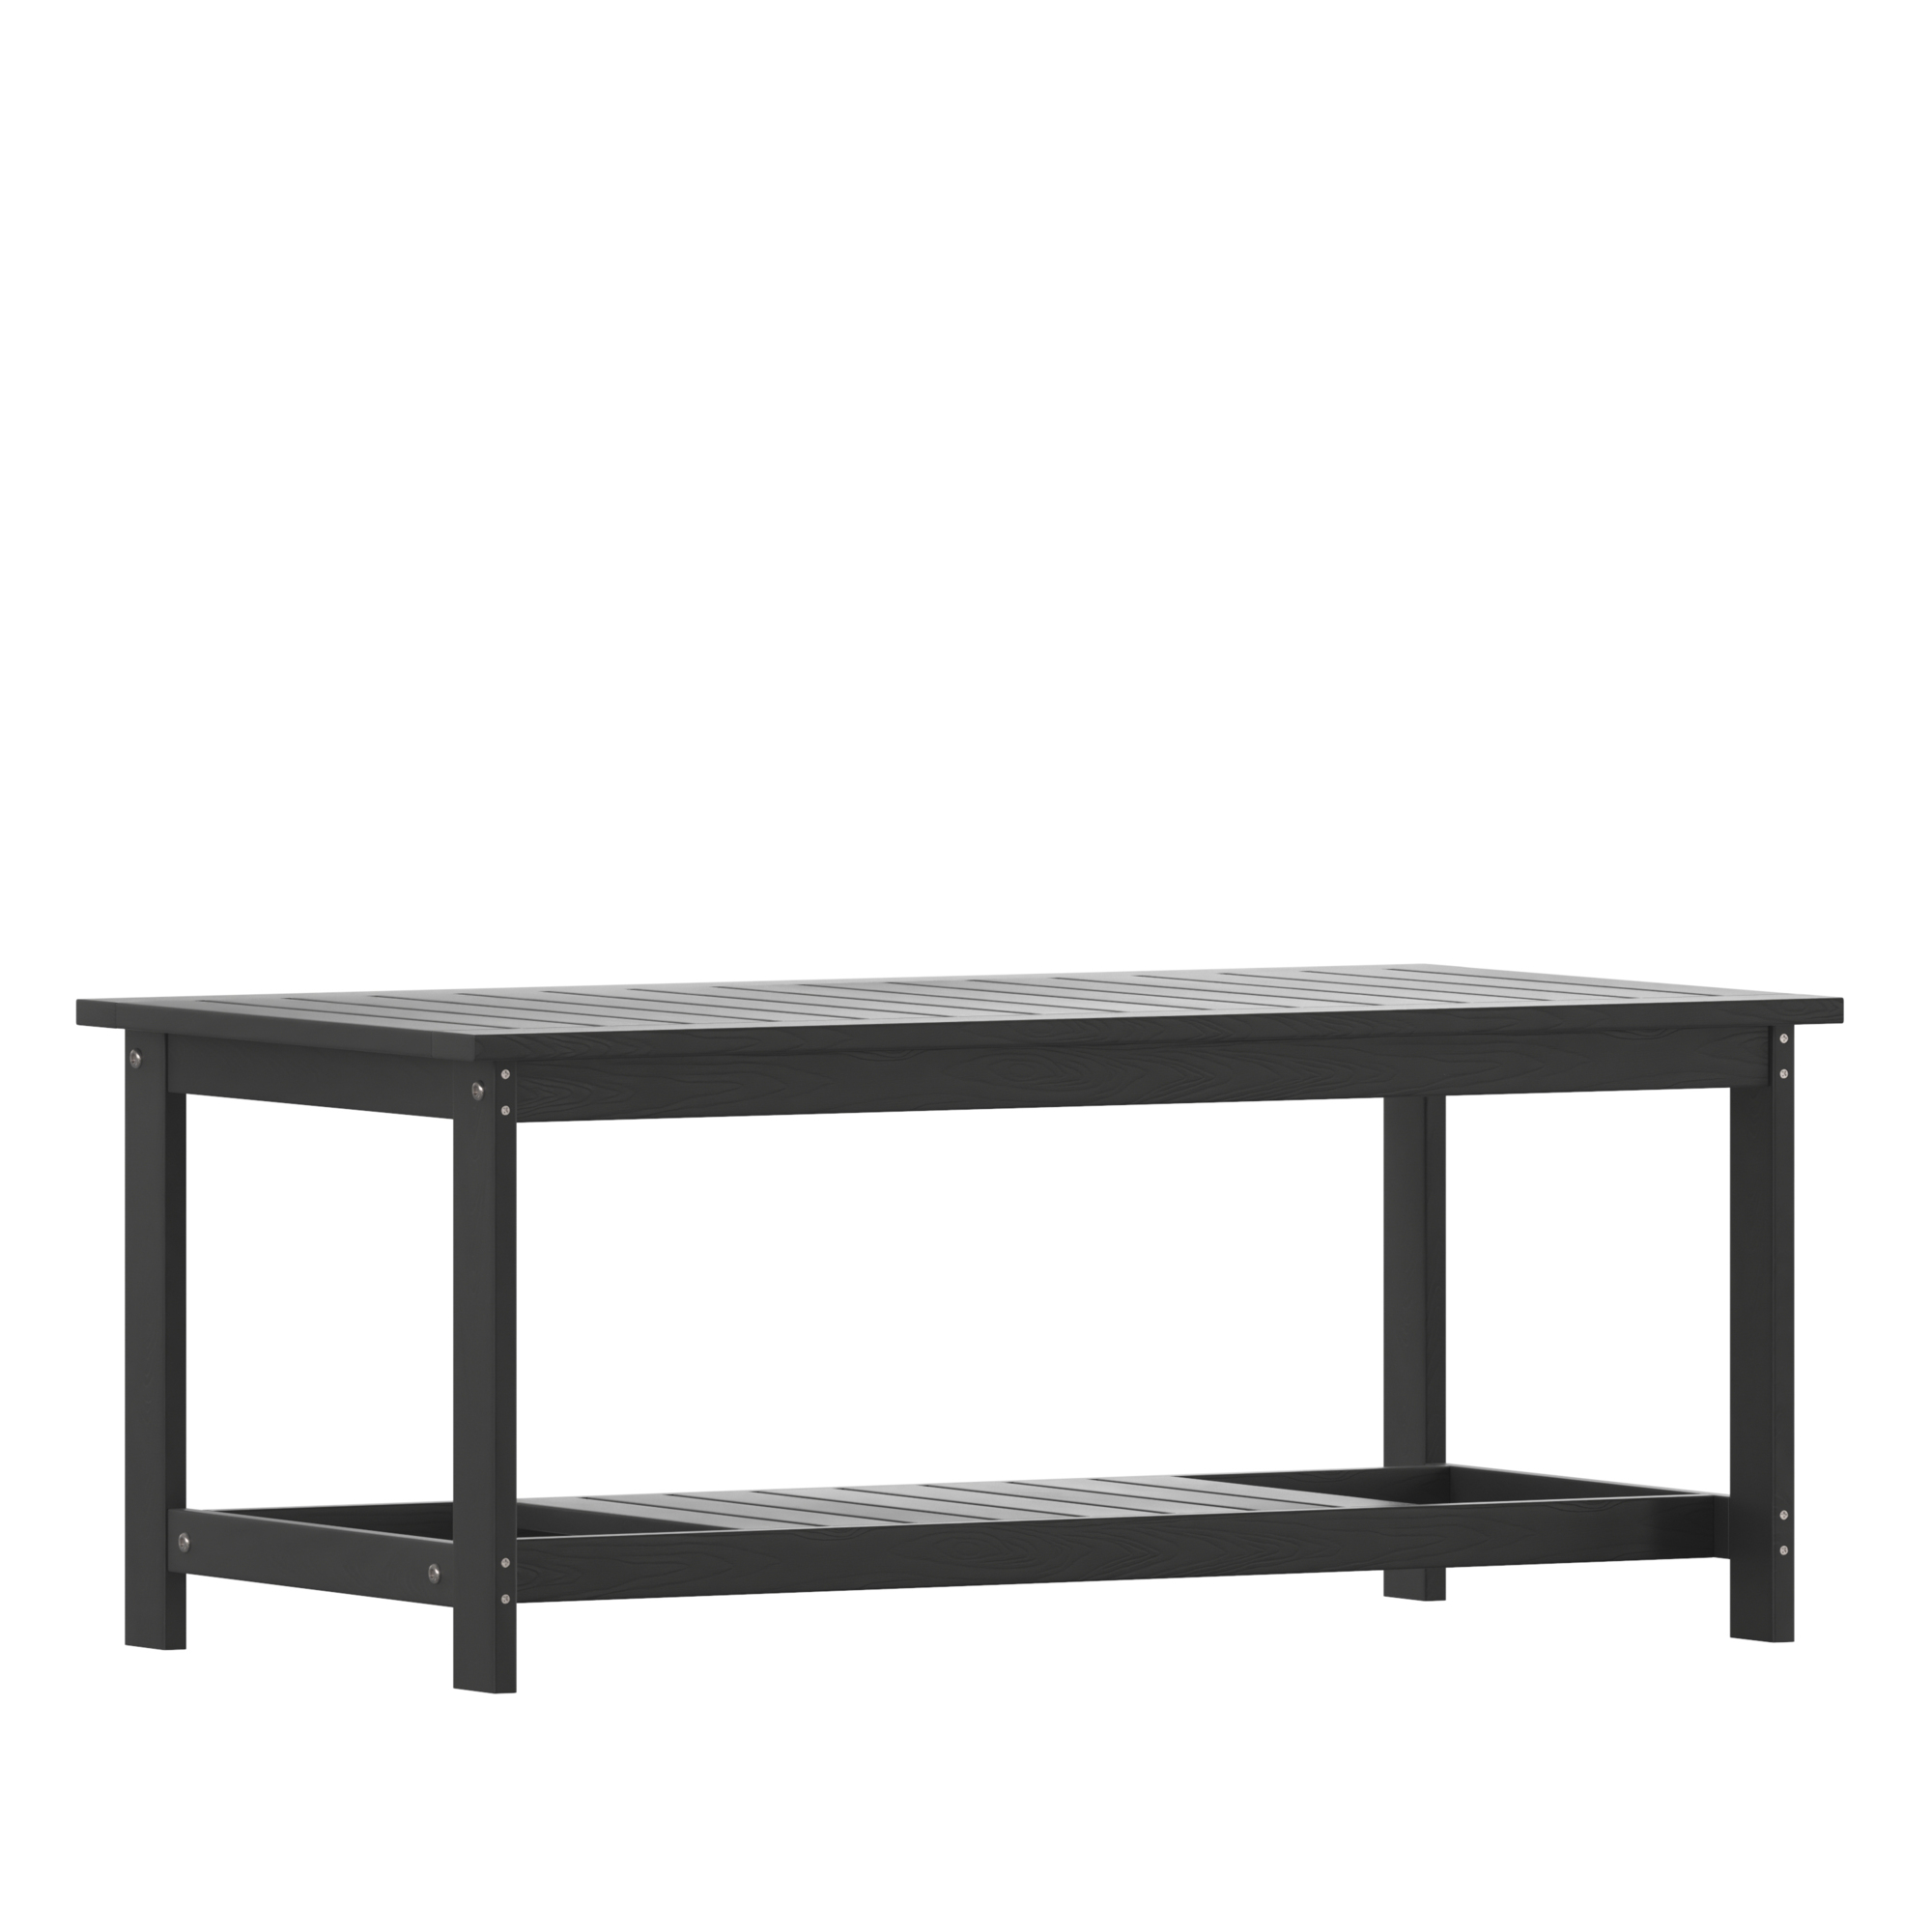 Flash Furniture, Black Poly Resin Adirondack Coffee Table, Table Shape Rectangle, Primary Color Black, Height 18.25 in, Model JJT14022BK